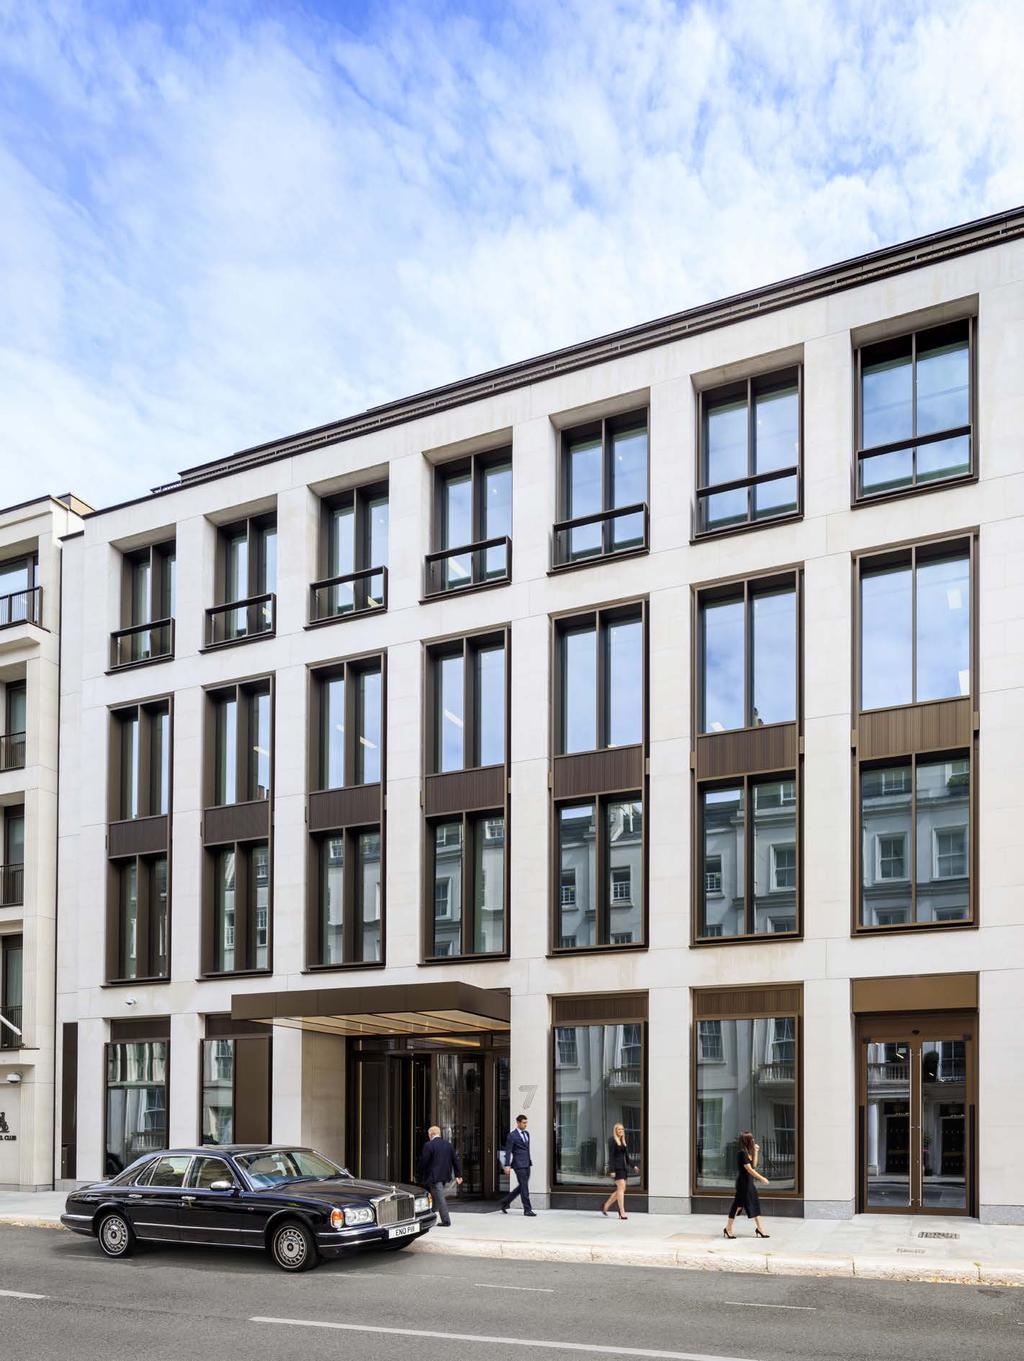 THE BUILDING British Land has worked with world-renowned architectural practice Squire & Partners to create 7 Clarges Street a building that blends the traditions of